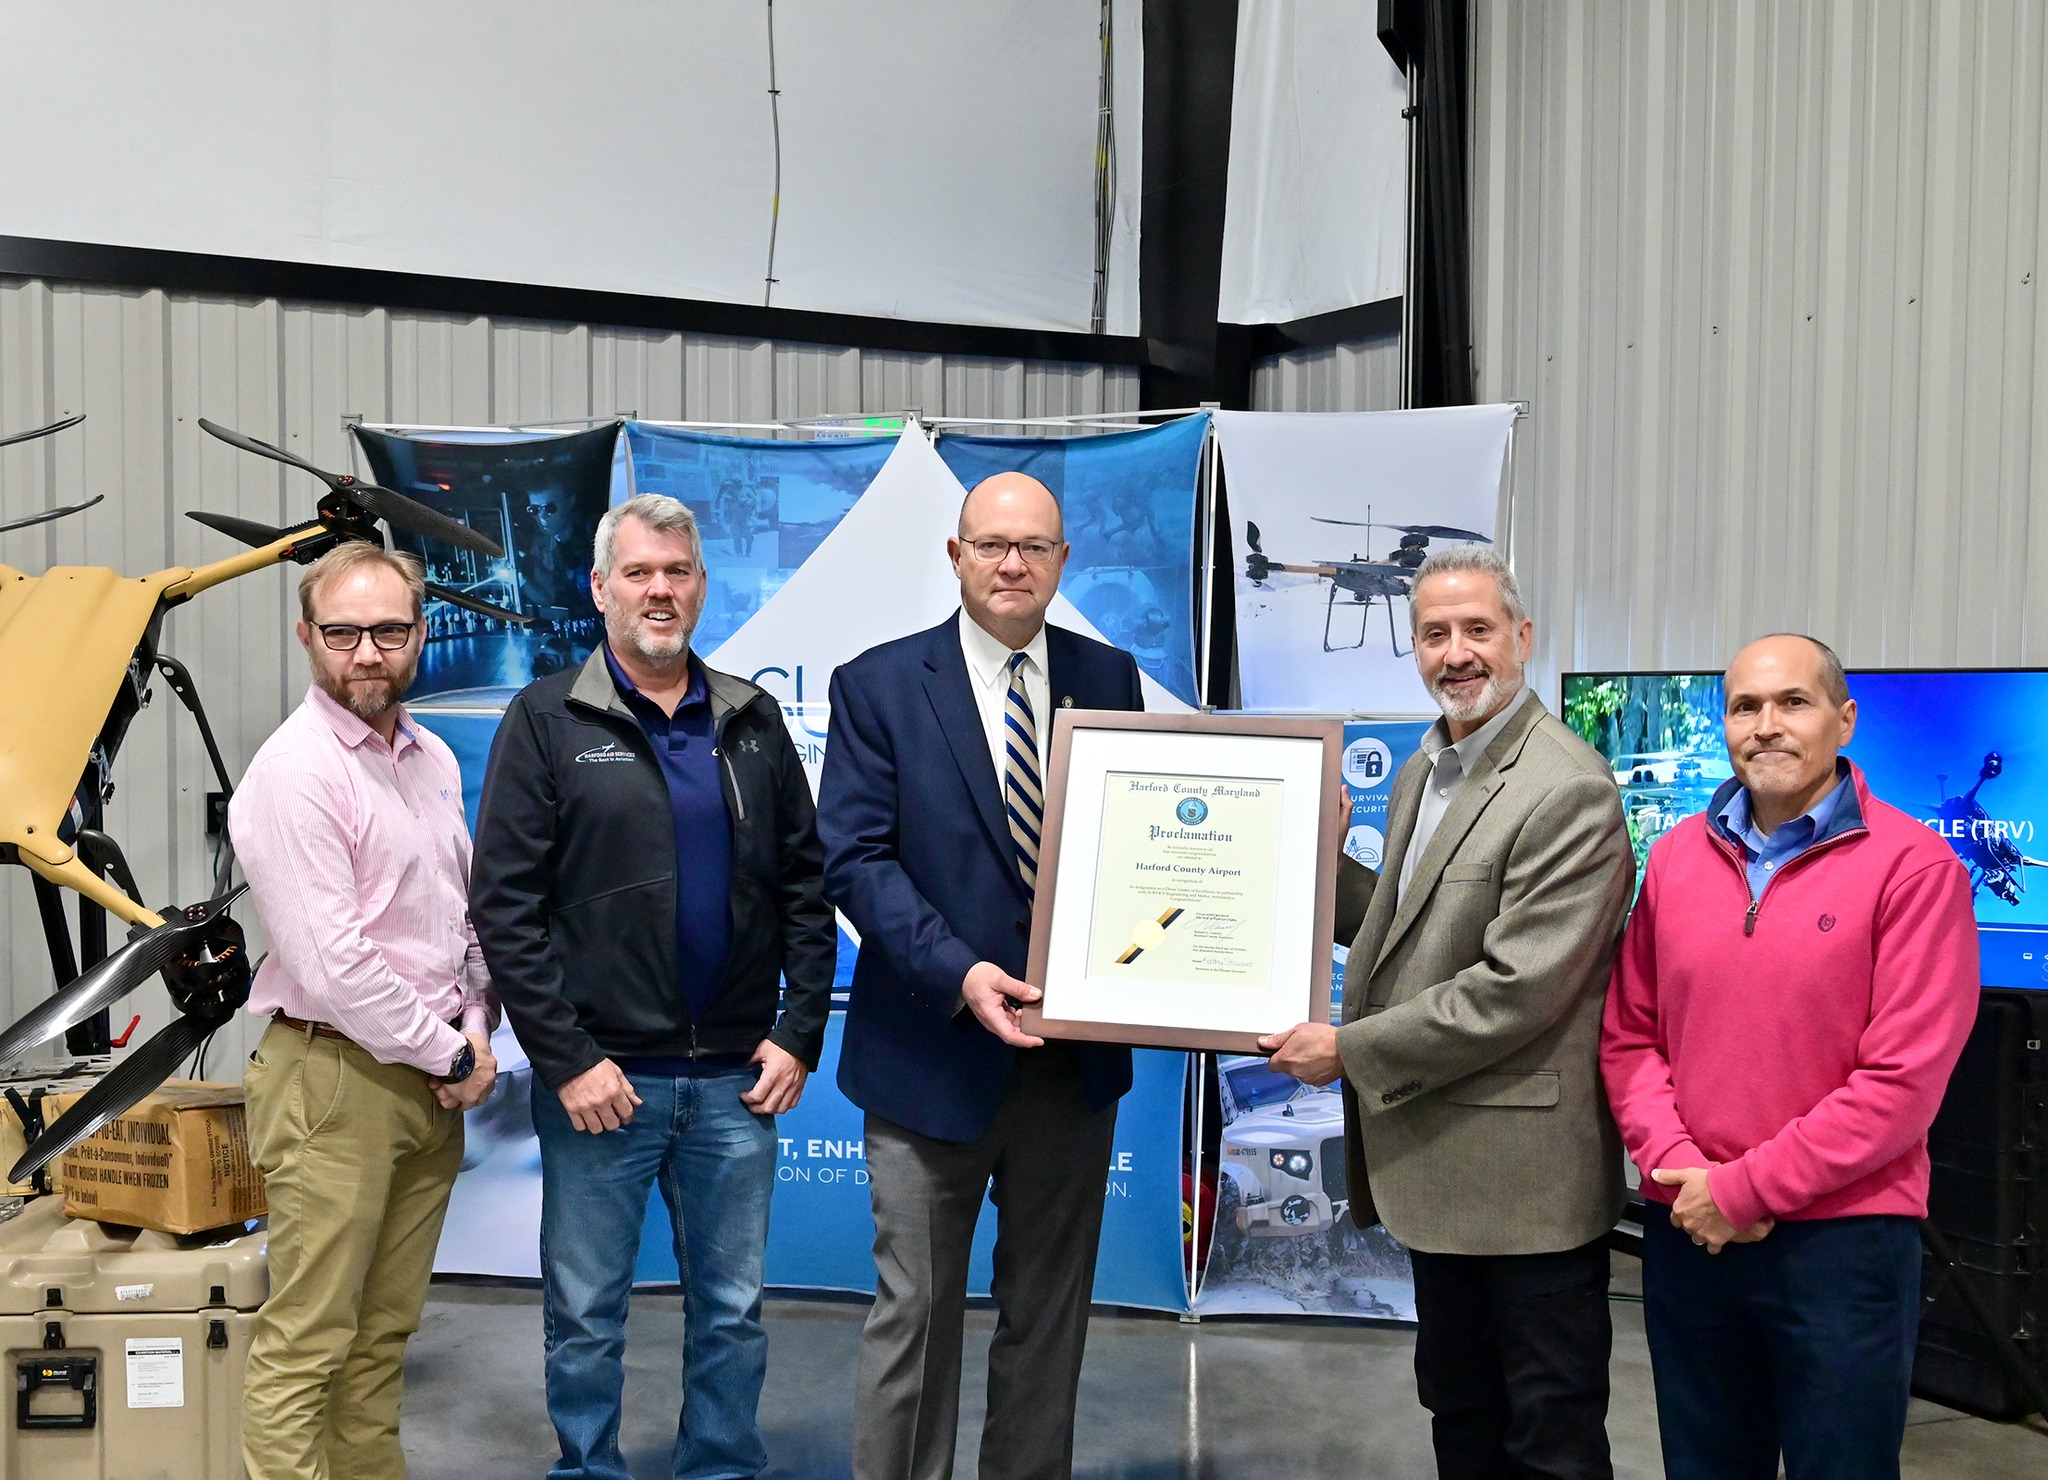 SURVICE being recognized as a Drone Center of Excellence.